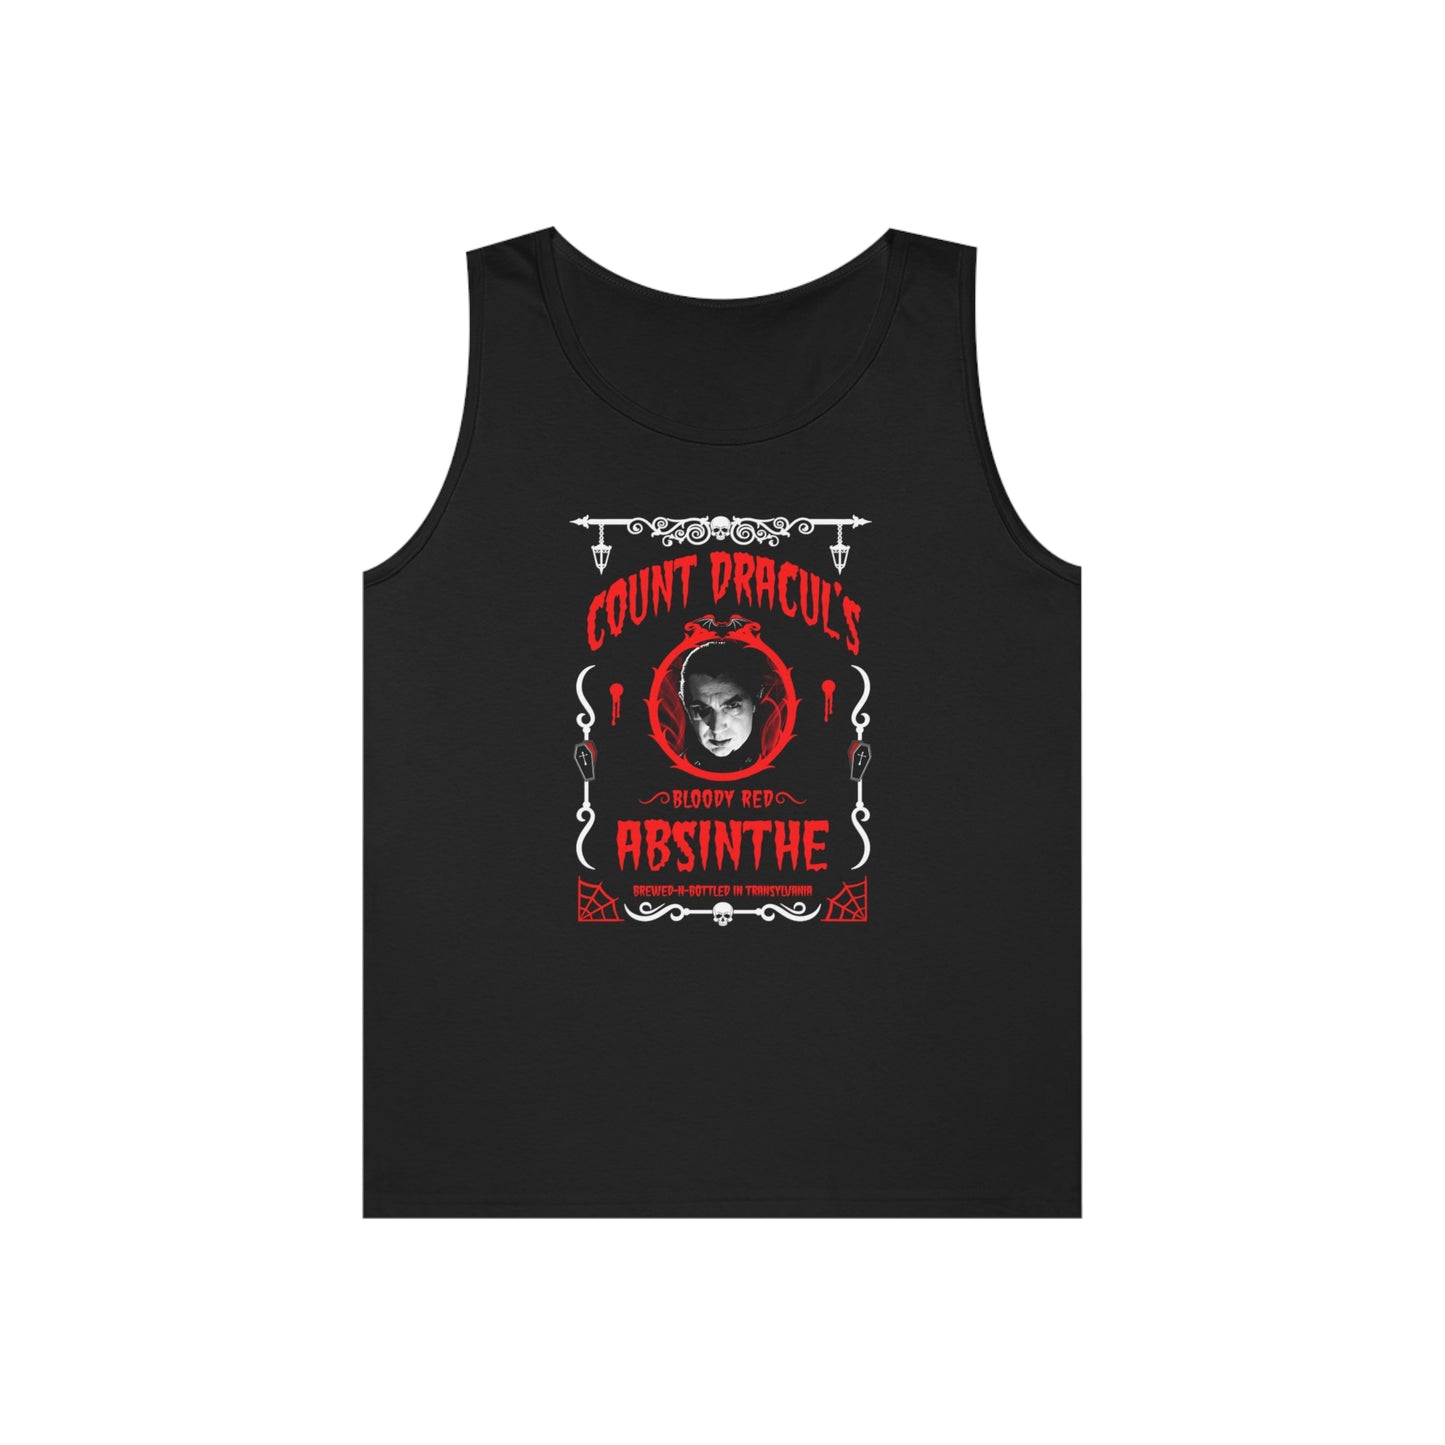 ABSINTHE MONSTERS 1 (COUNT DRACUL) Unisex Heavy Cotton Tank Top